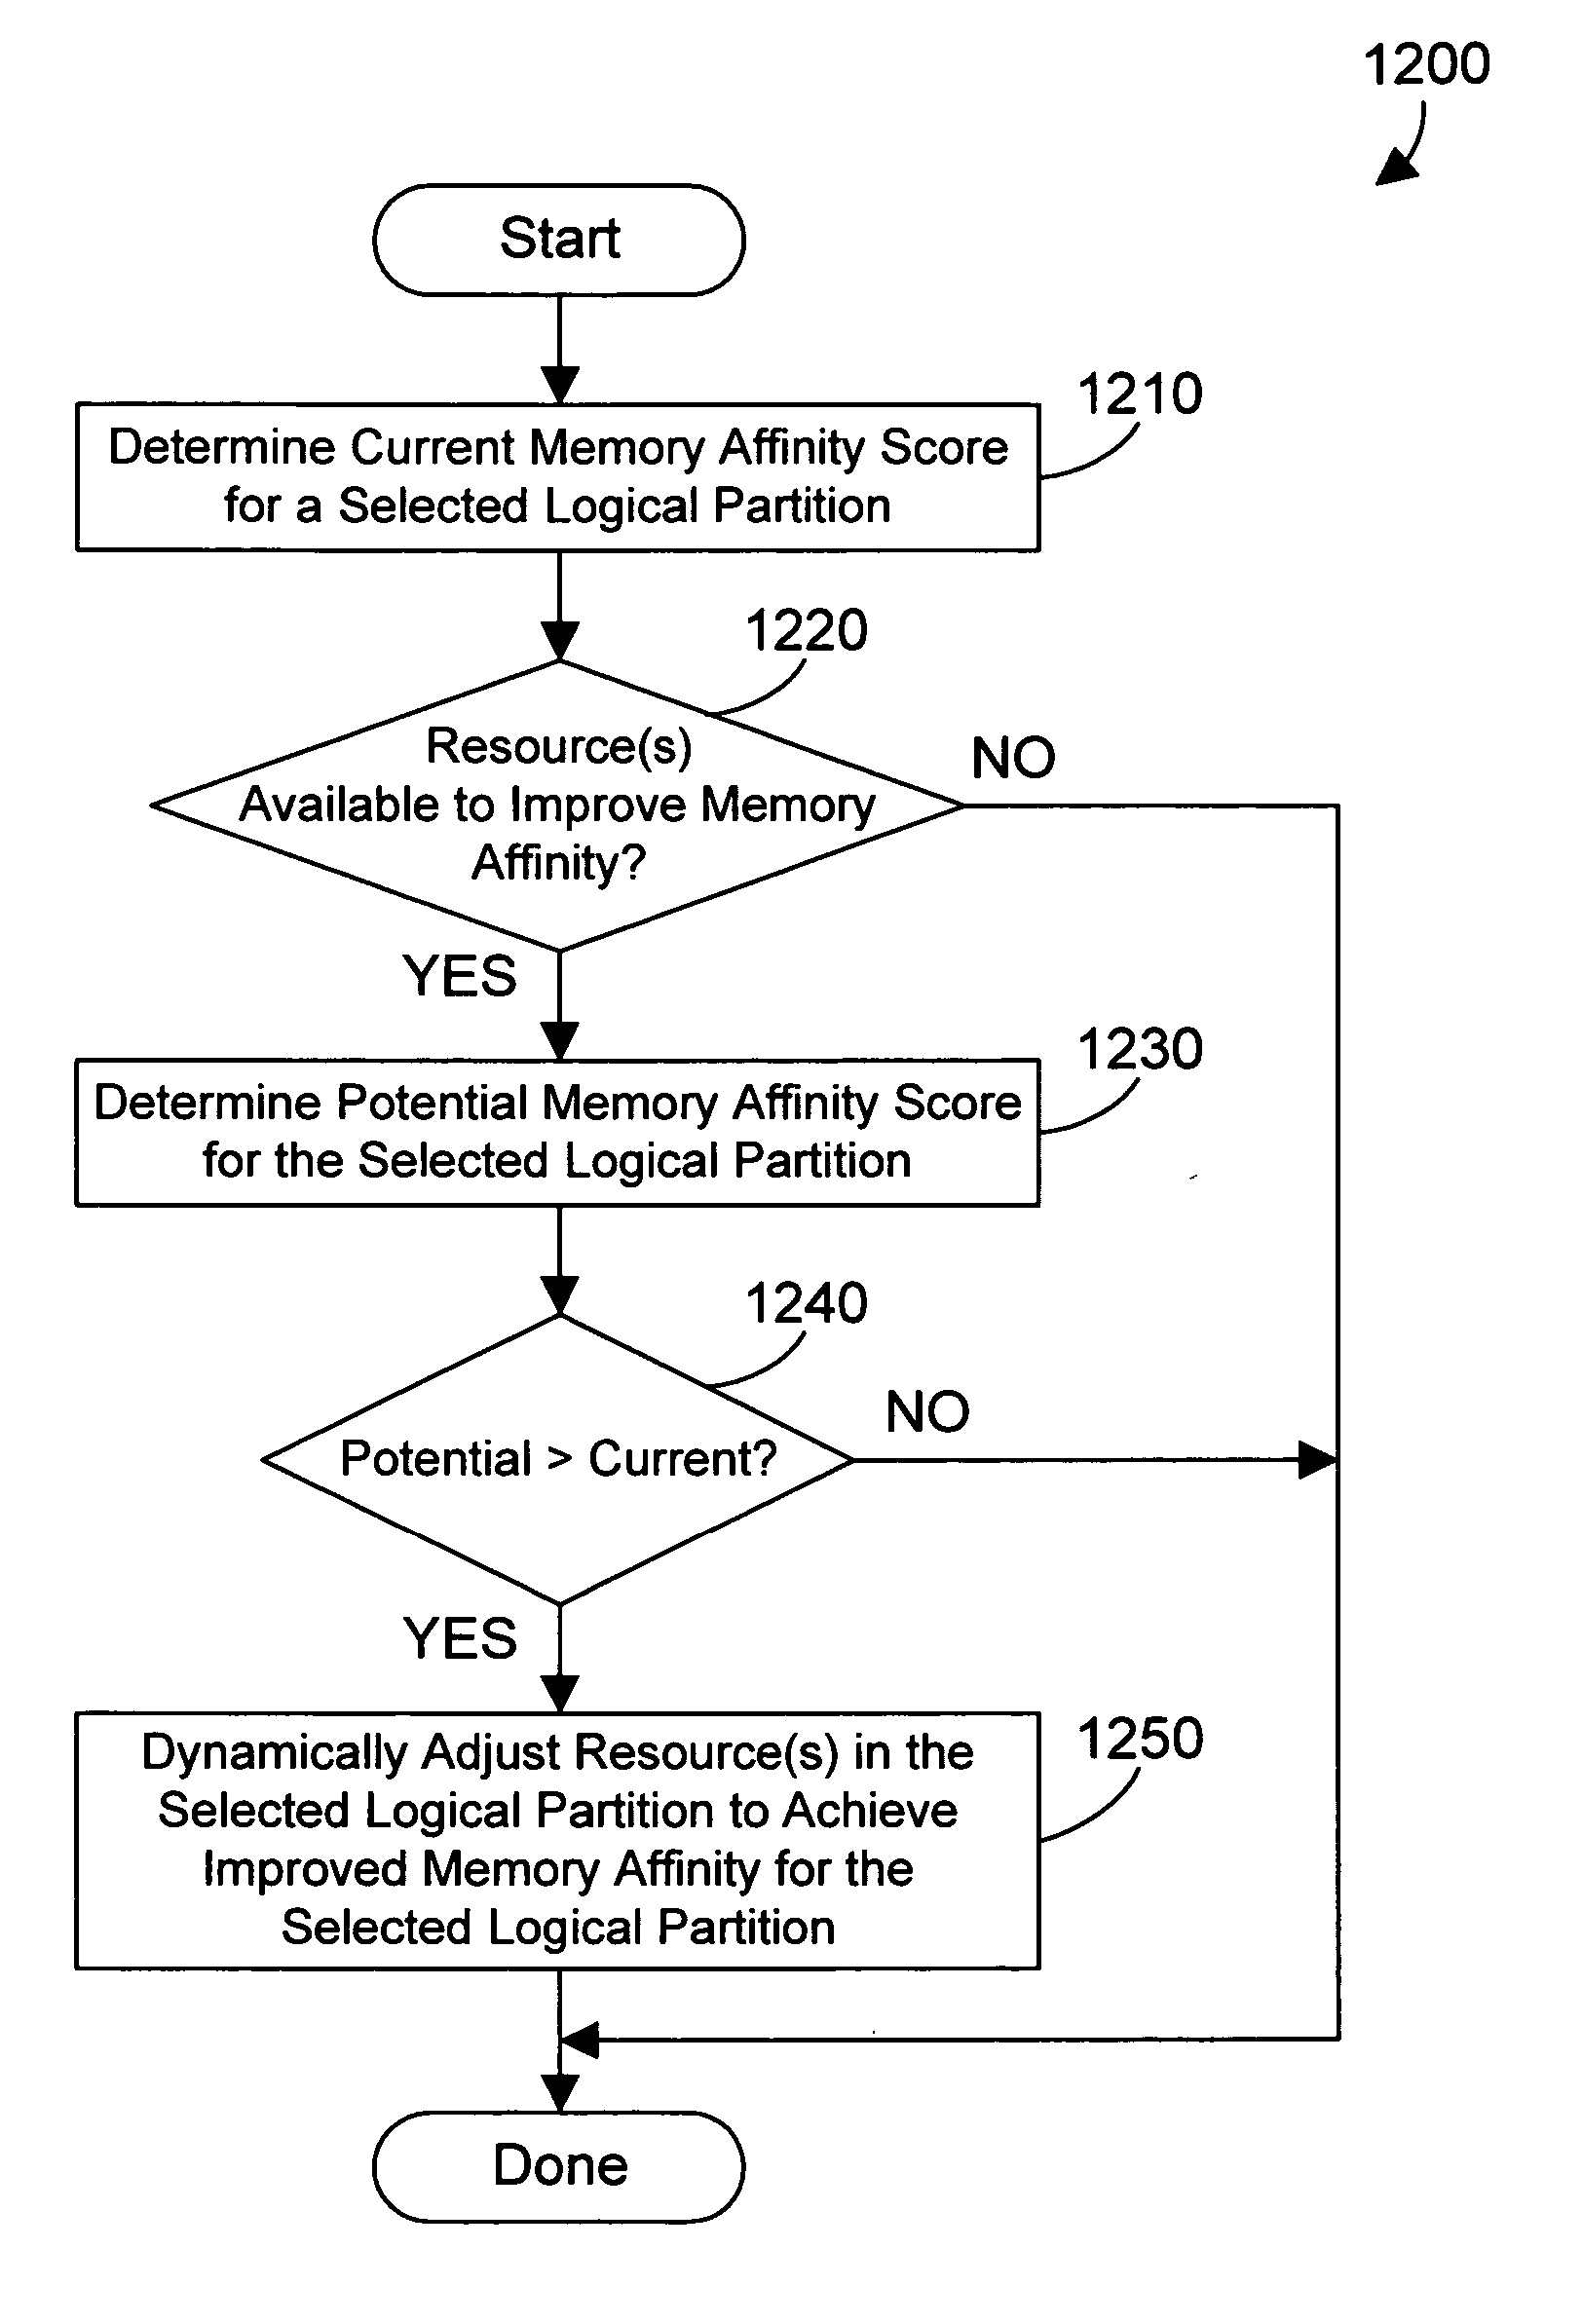 Apparatus and method for dynamically improving memory affinity of logical partitions